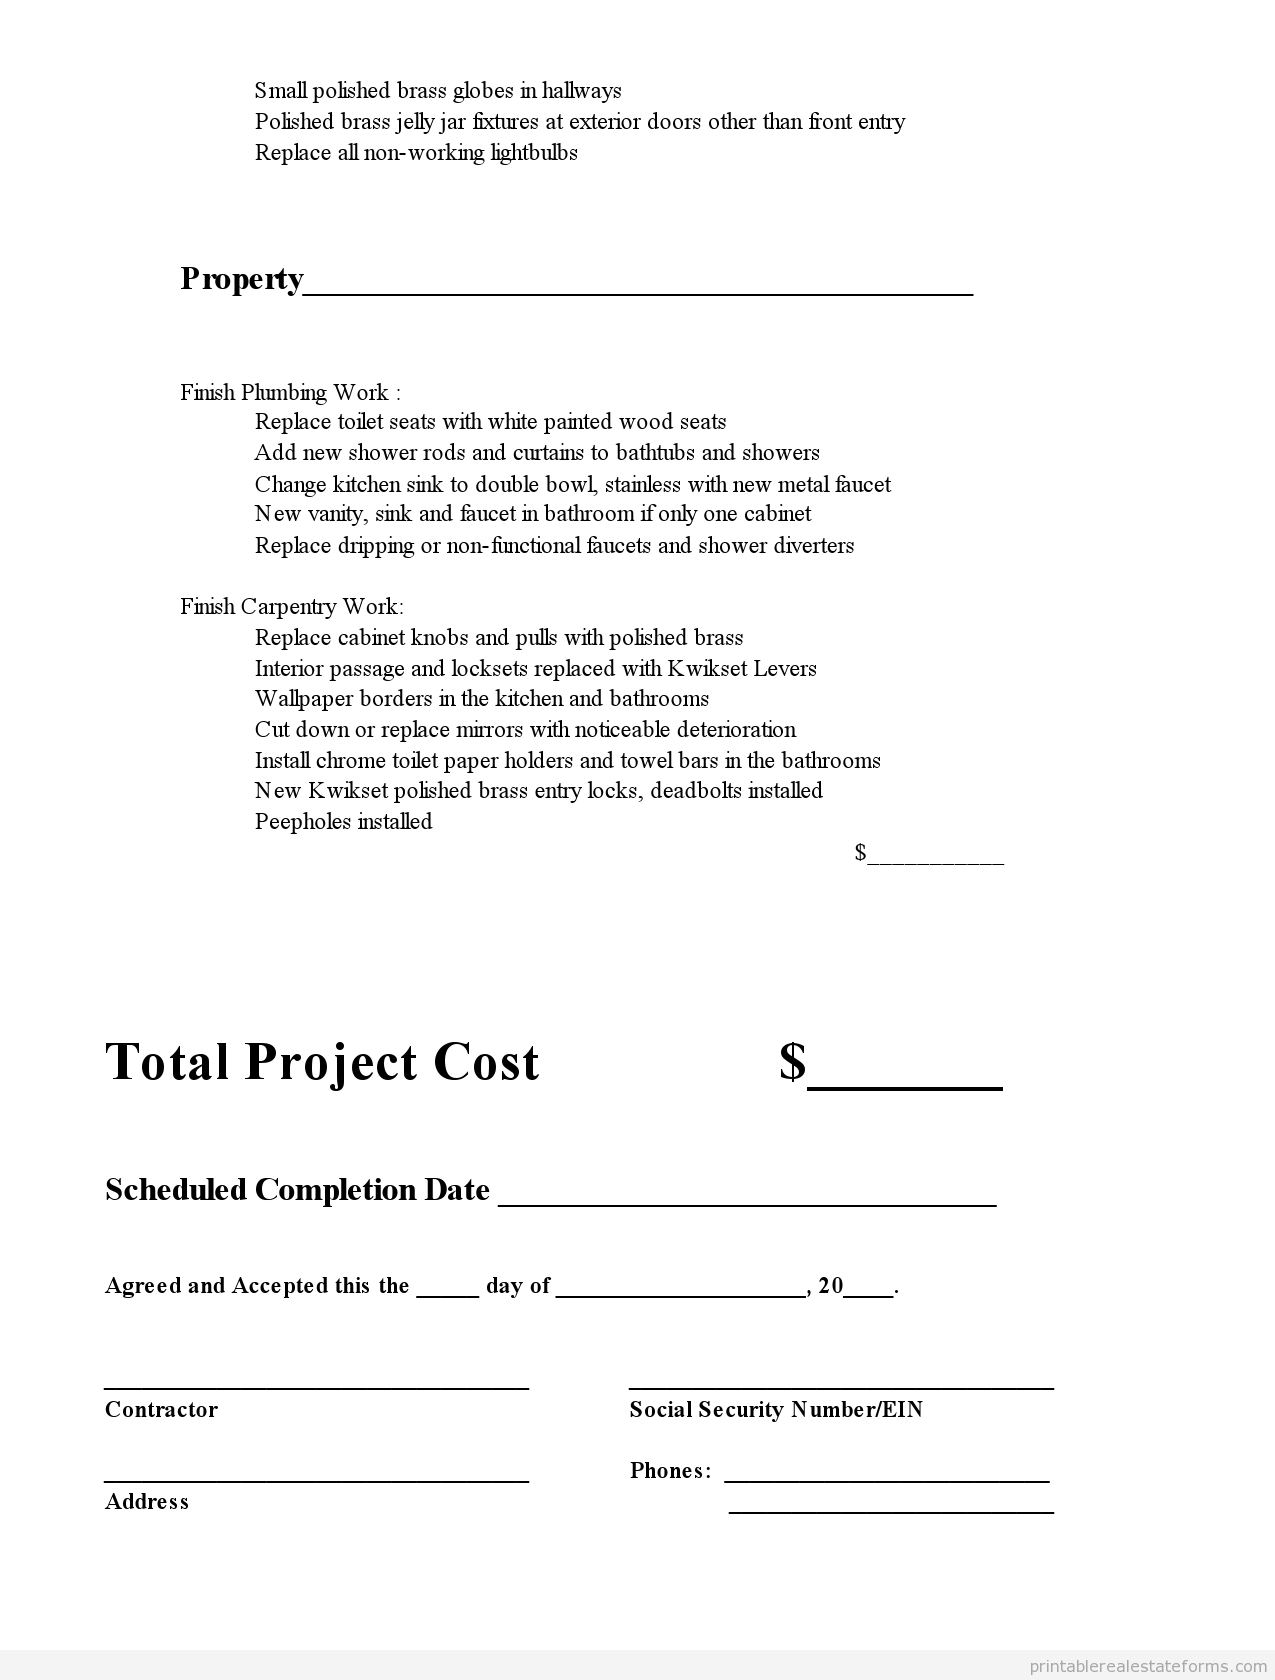 Free Subcontractor Agreement Template Australia 004 Template Ideas Subcontractor Agreement Stirring Free Contracts